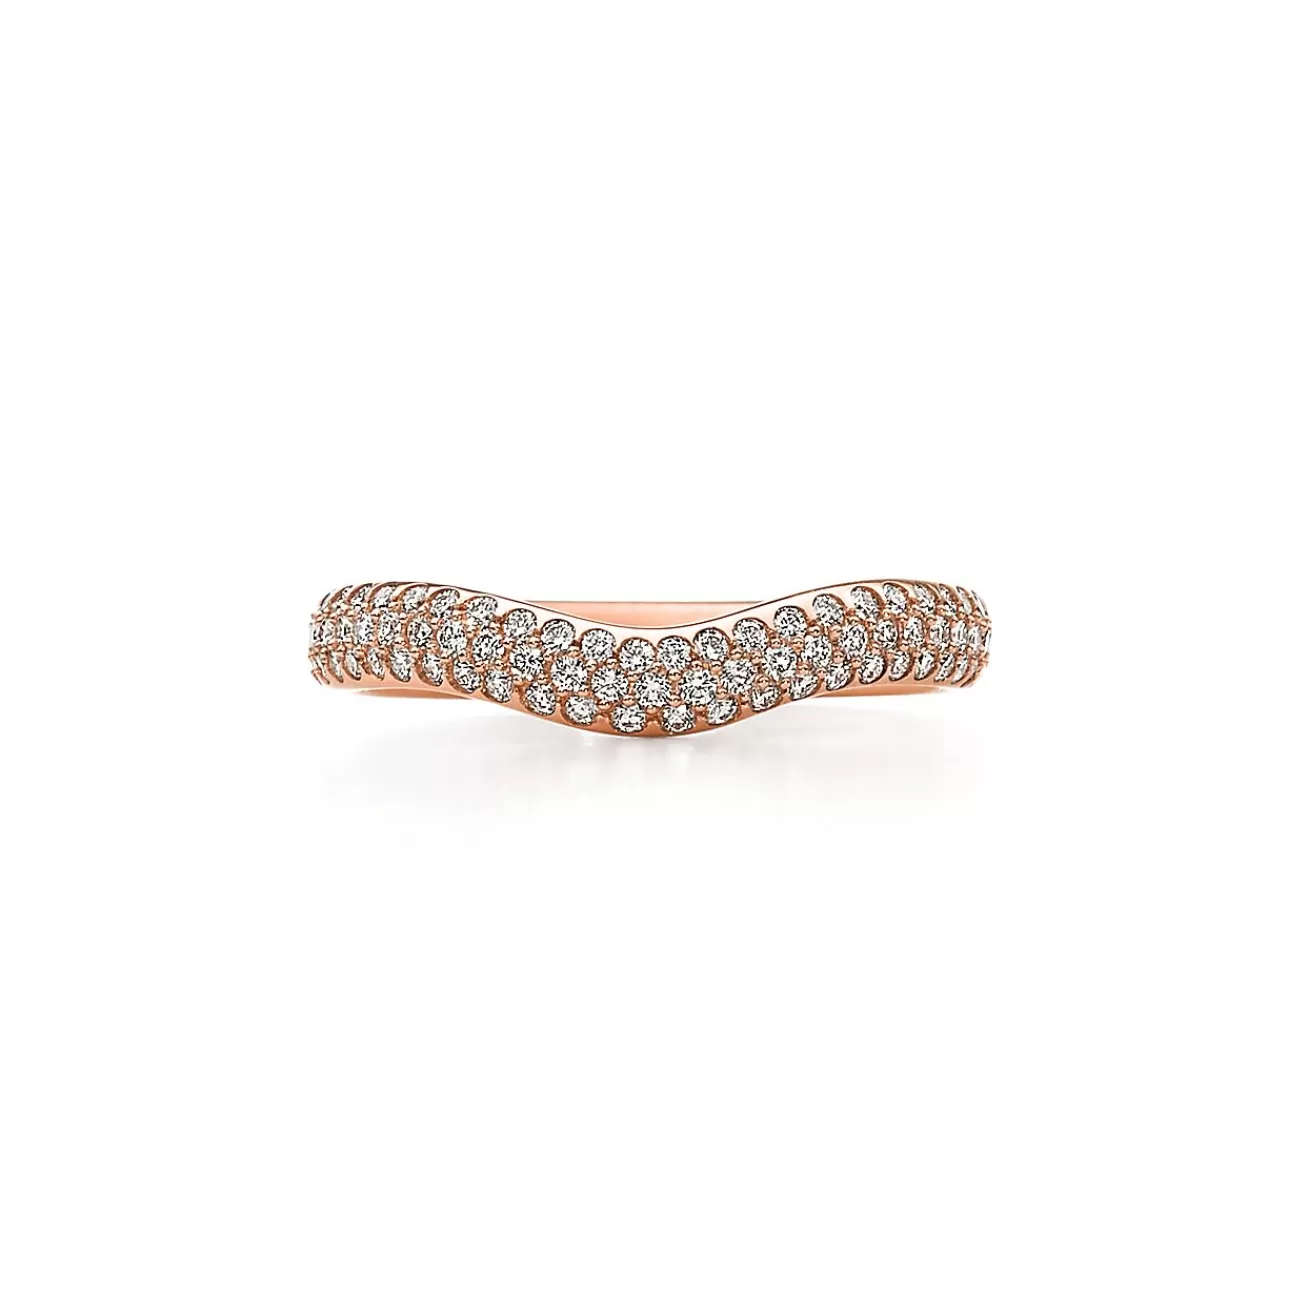 Tiffany & Co. Elsa Peretti® curved pavé band ring in 18k rose gold. | ^ Rings | Rose Gold Jewelry